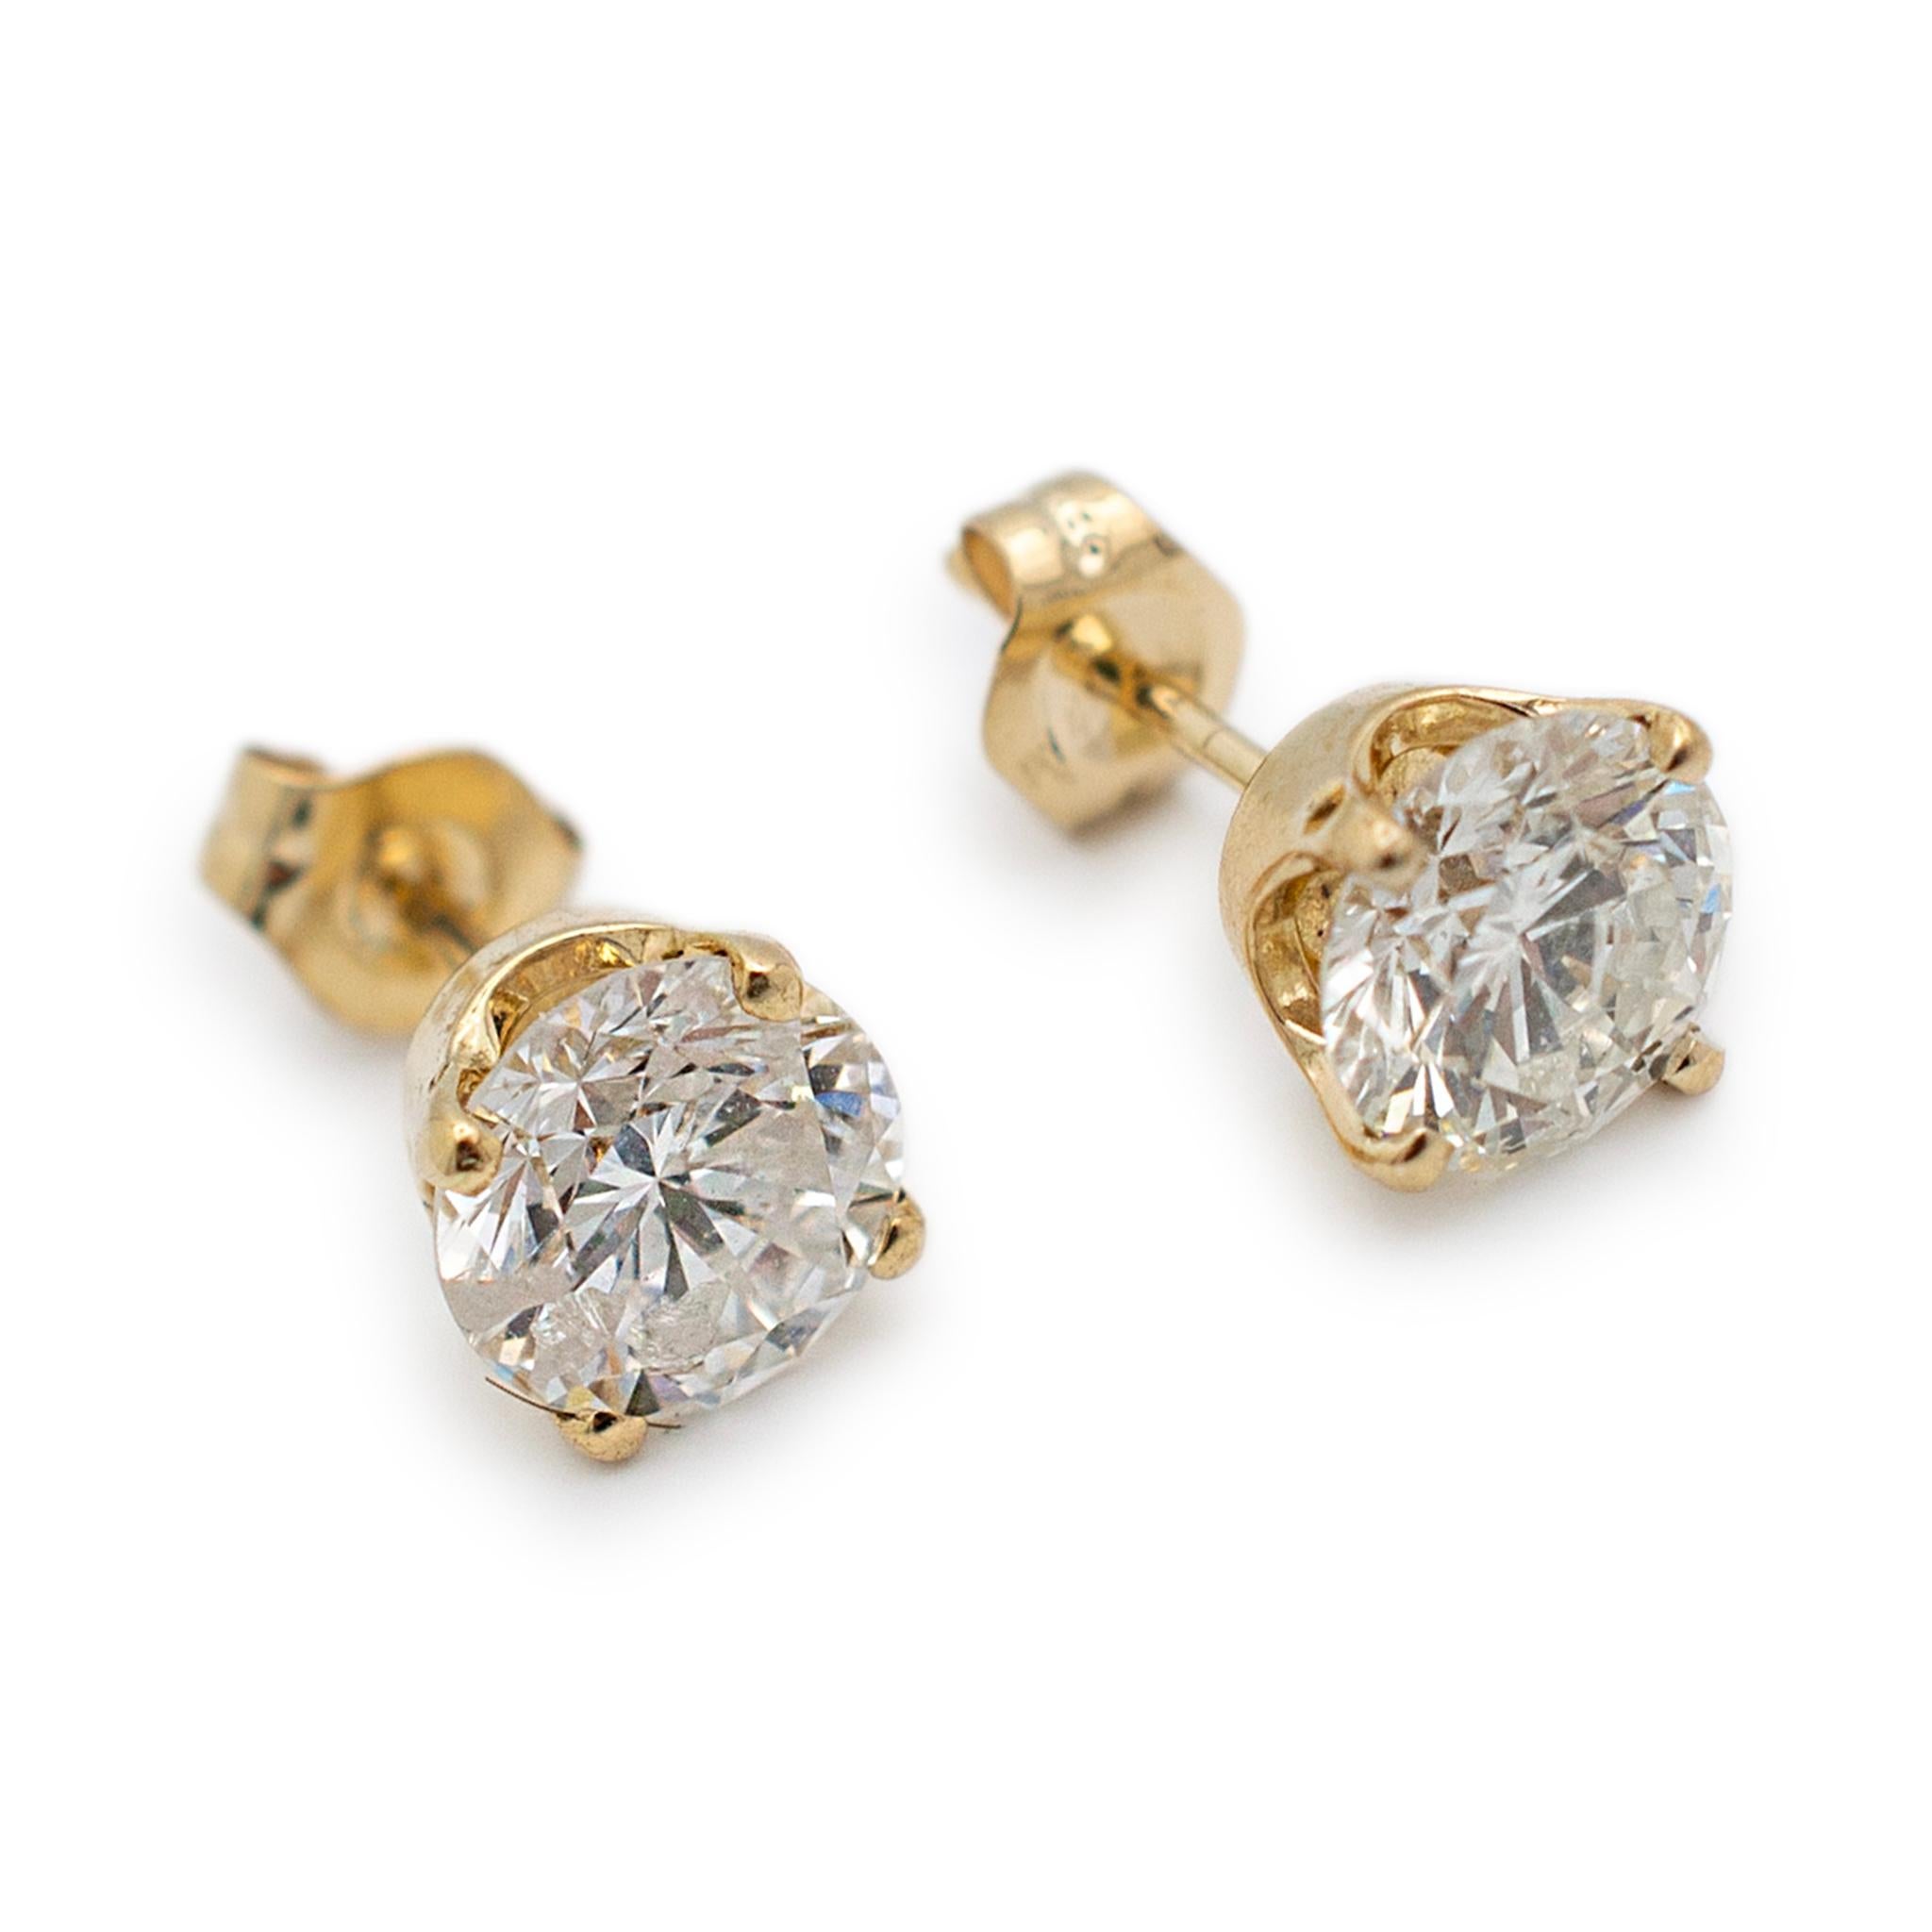 Ladies 14K Yellow Gold 1.80CT Diamond Push Back Stud Earrings In Excellent Condition For Sale In Houston, TX